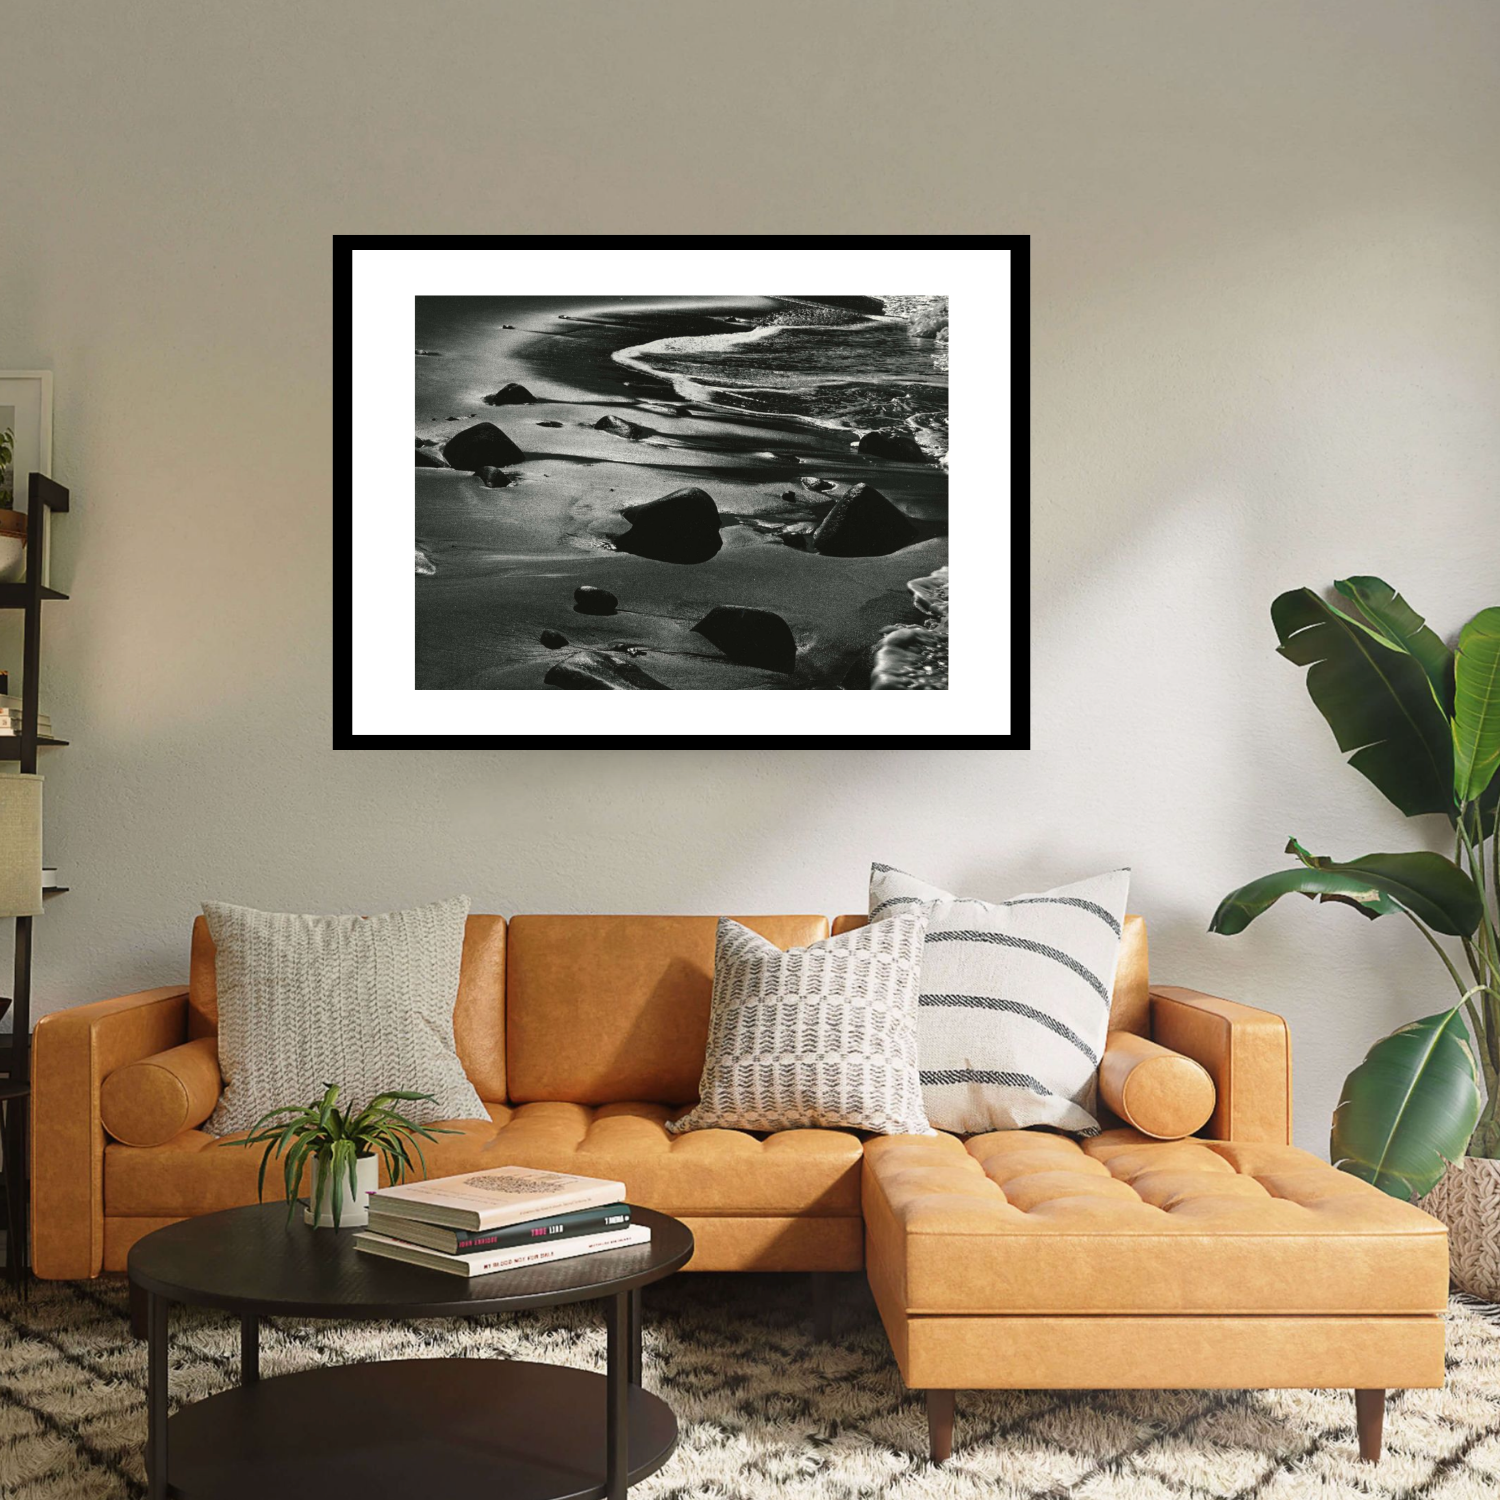 Black framed black and white print ‘Rocks Water Coast California’ by Brett Weston: An evocative photograph of an ocean coast with scattered rocks